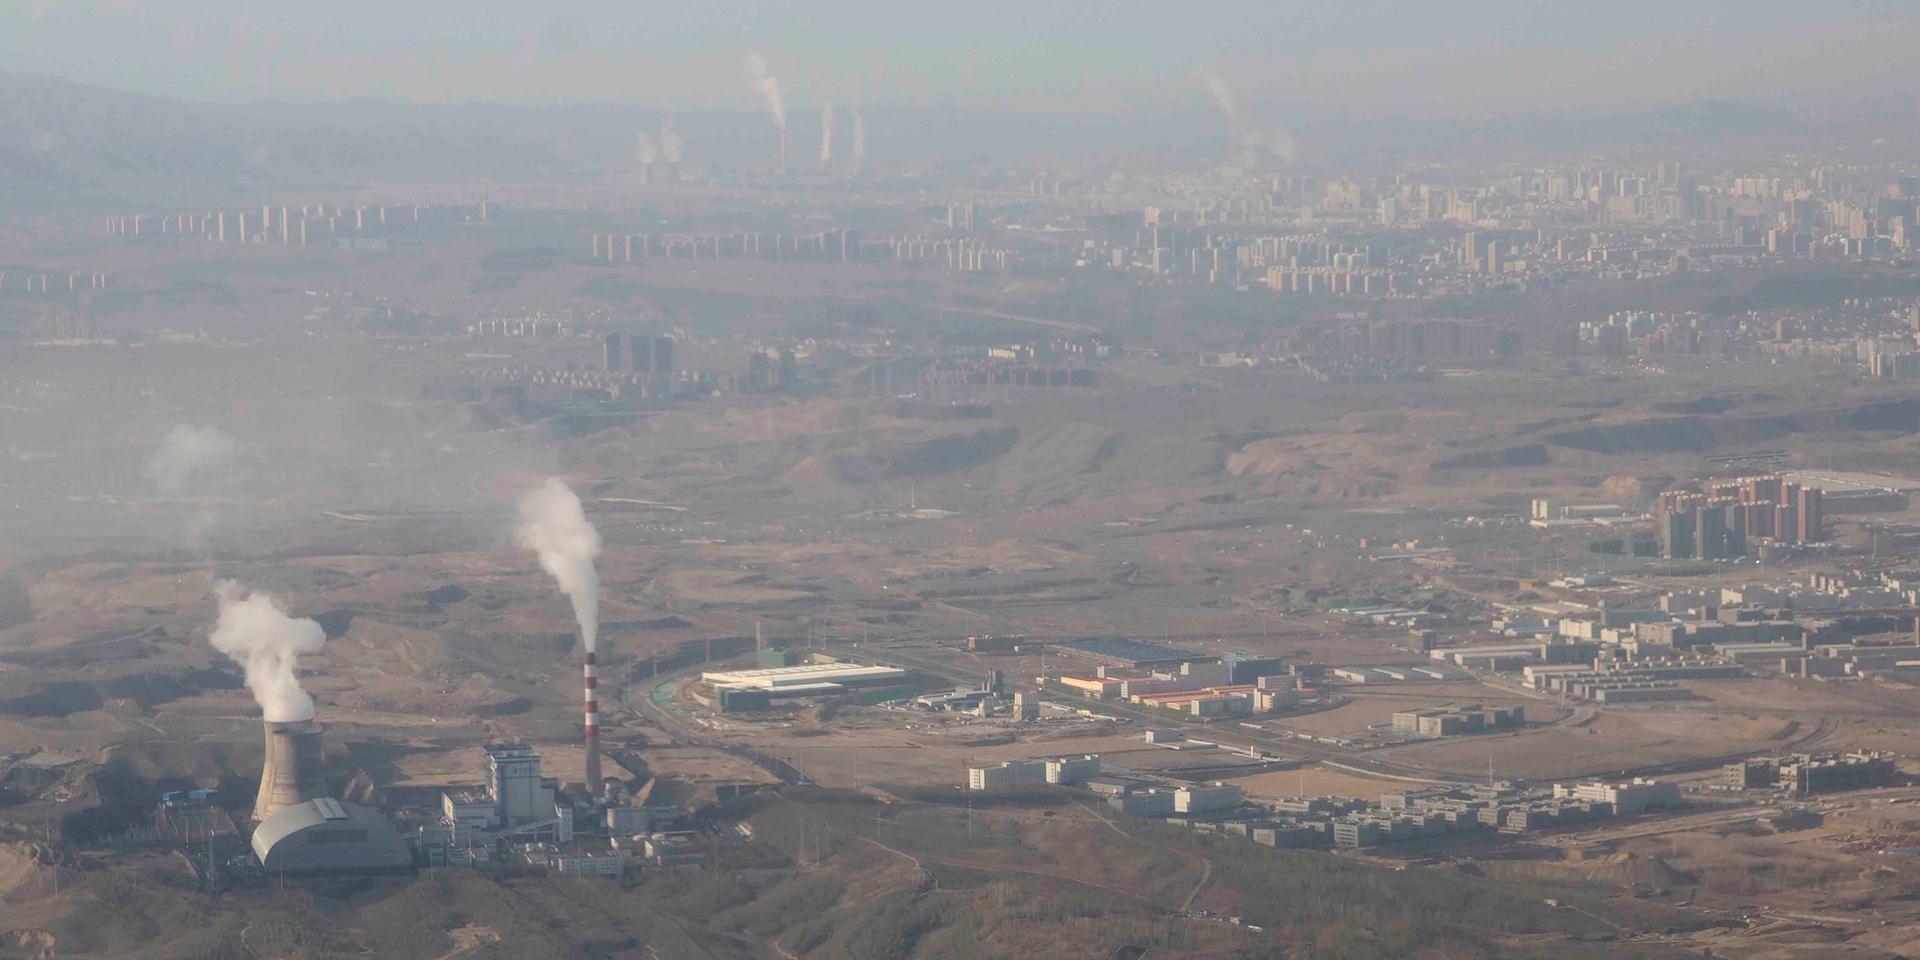 Smoke and steam rise from towers at the coal-fired Urumqi Thermal Power Plant in Urumqi in western China's Xinjiang Uyghur Autonomous Region, Wednesday, April 21, 2021. China, the world's biggest coal user, said Tuesday the fossil fuel will play a less dominant role in its energy mix and that, despite plans to build new coal-fired power plants, the country won't use it on a wide scale. (AP Photo/Mark Schiefelbein)  XMAS202